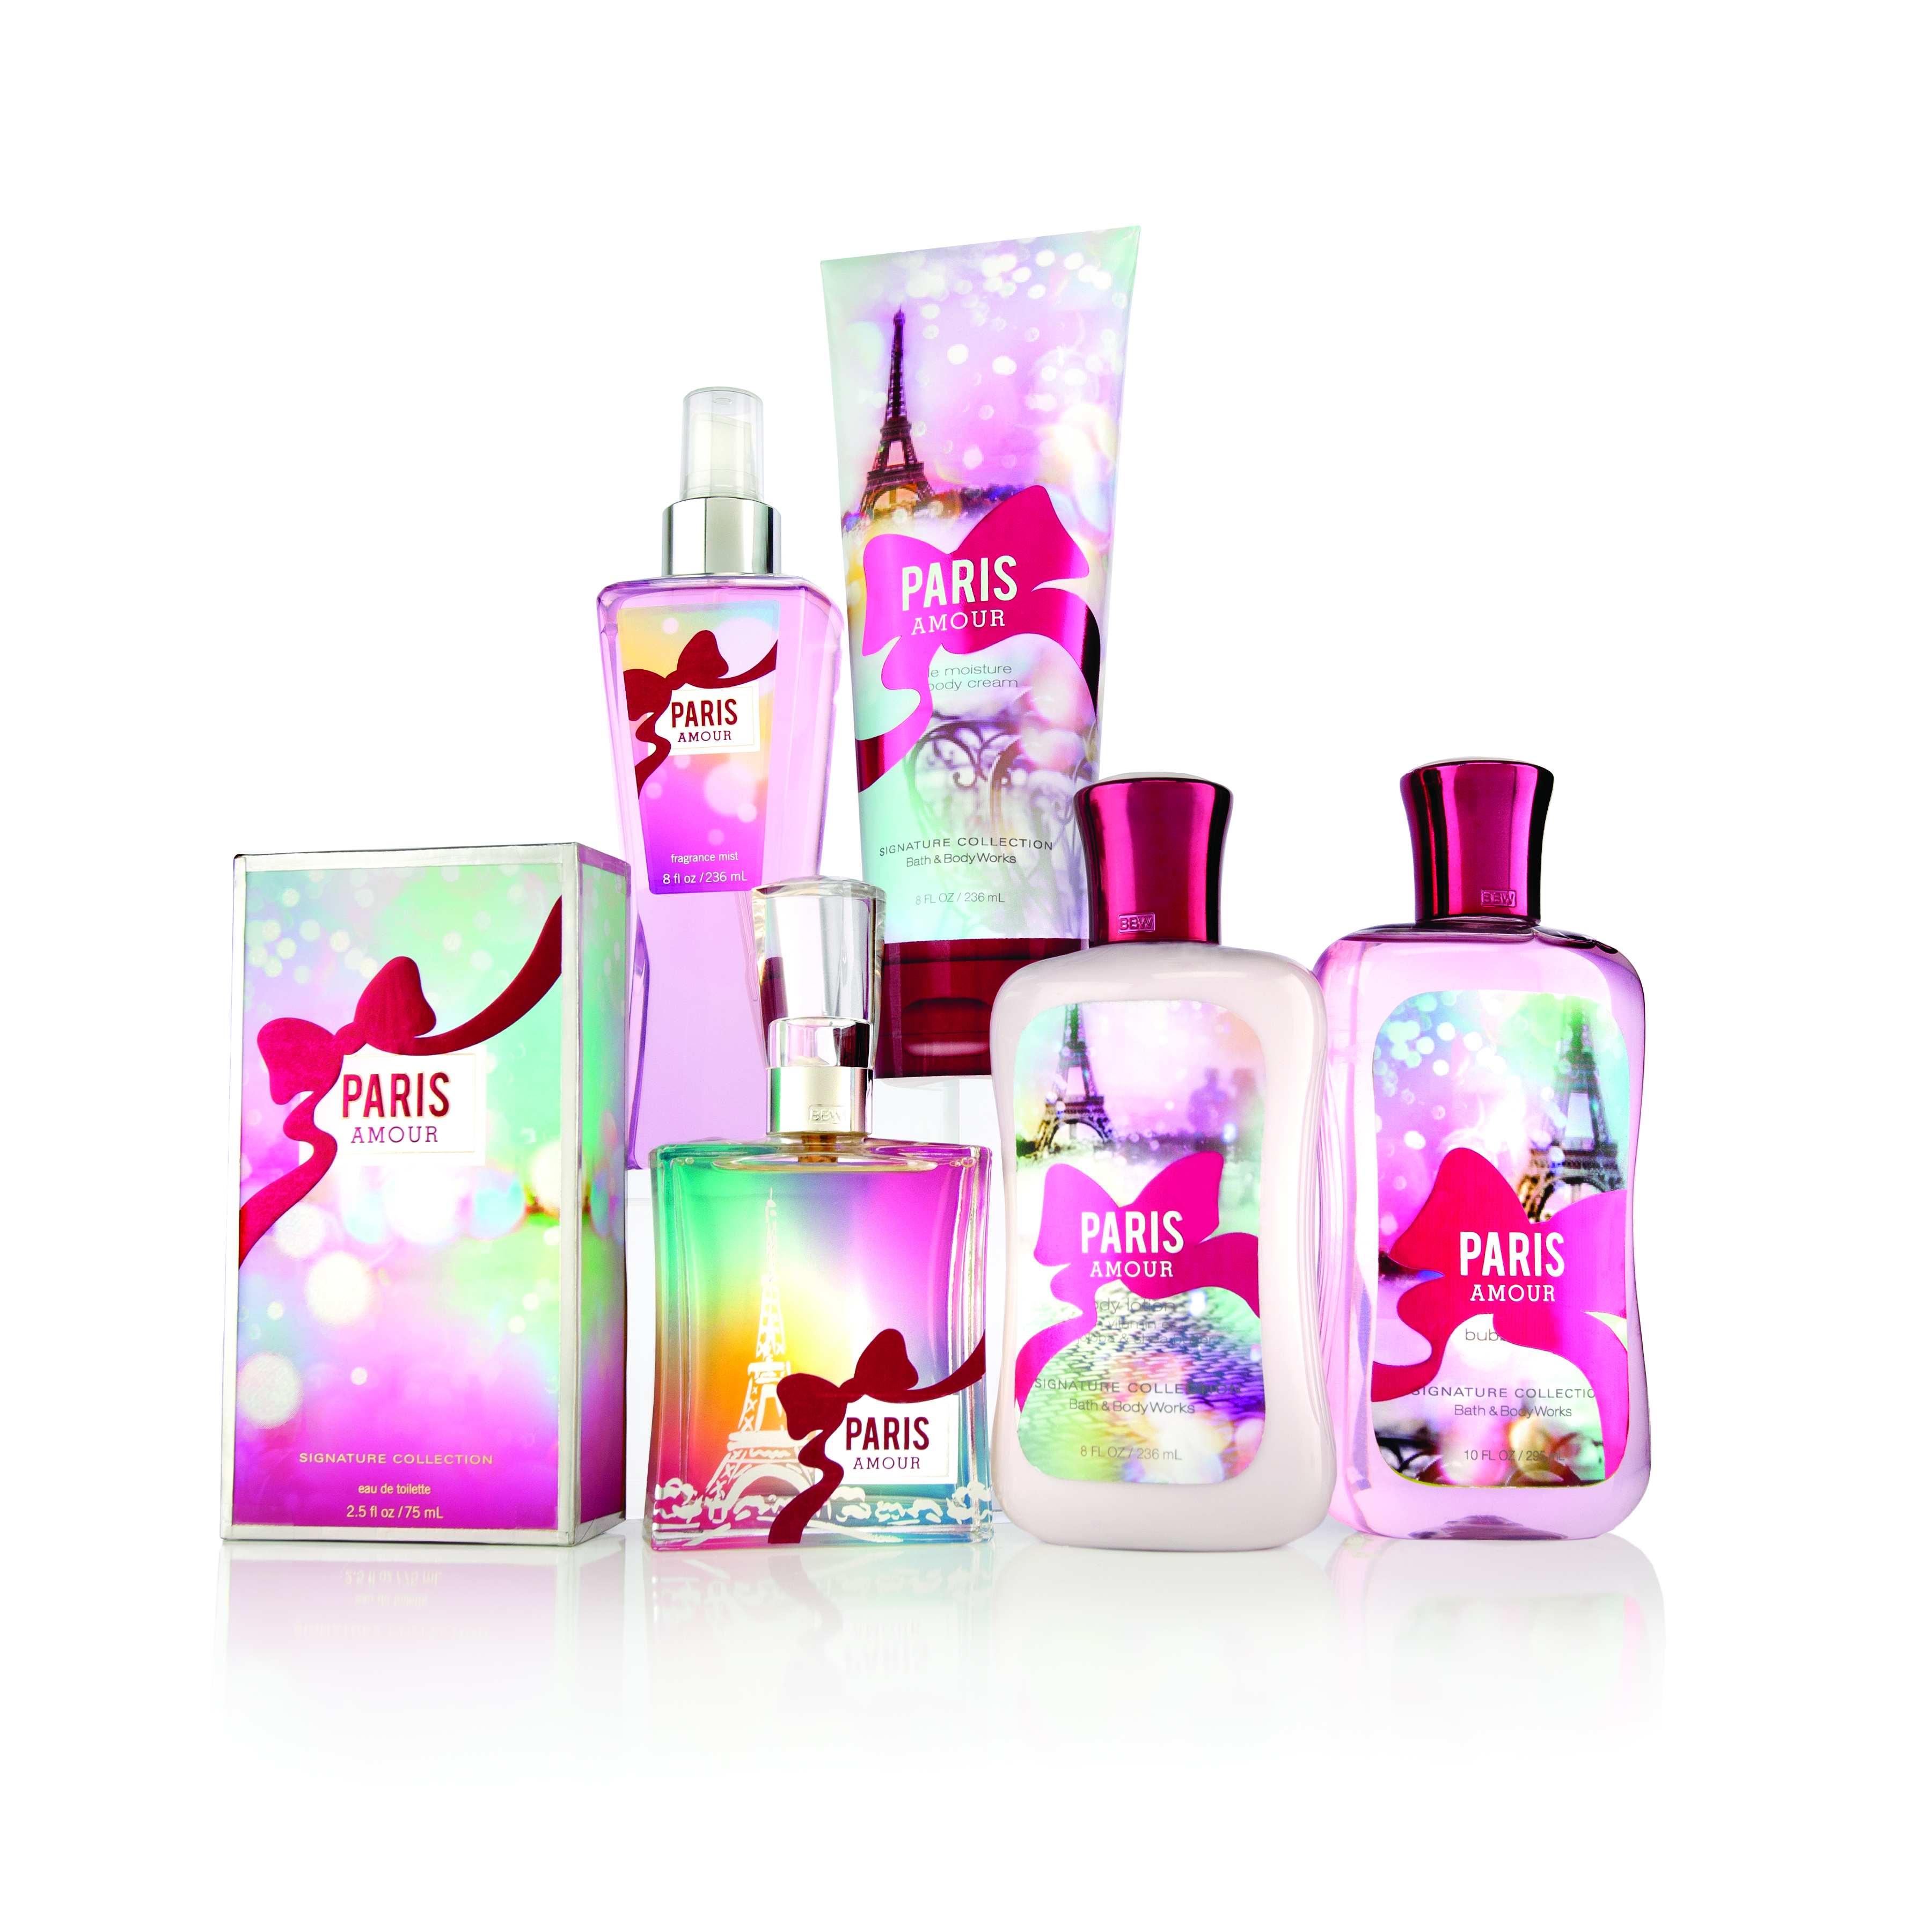 I Love Paris Event at Bath & Body Works Stores – Saturday, August 13